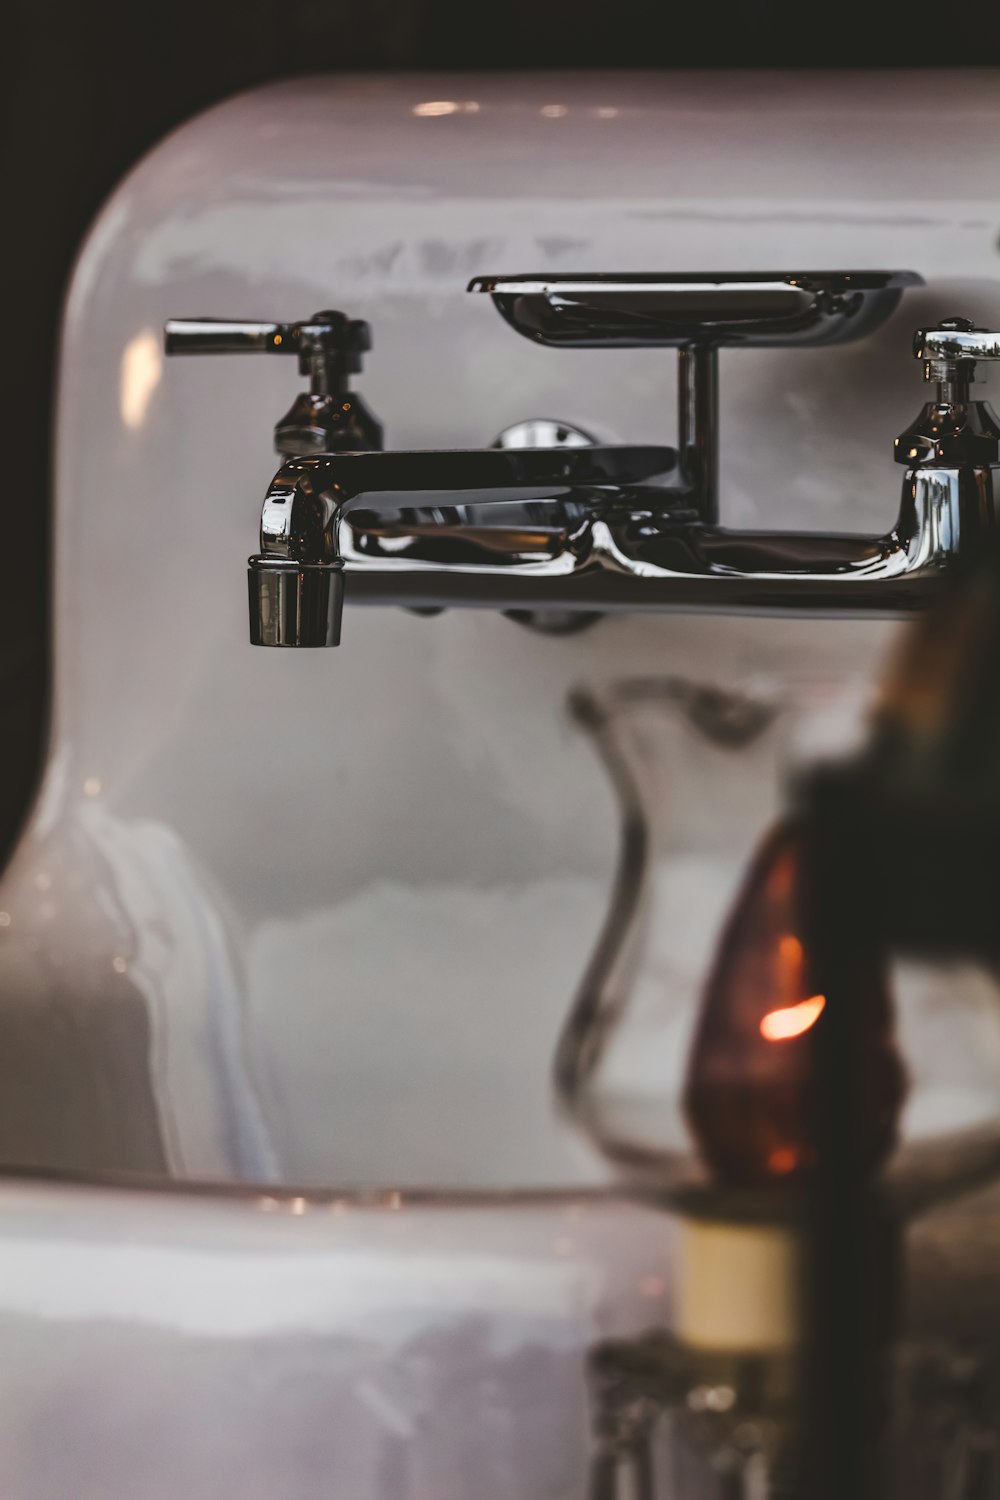 a close up of a sink with a faucet and soap dispense